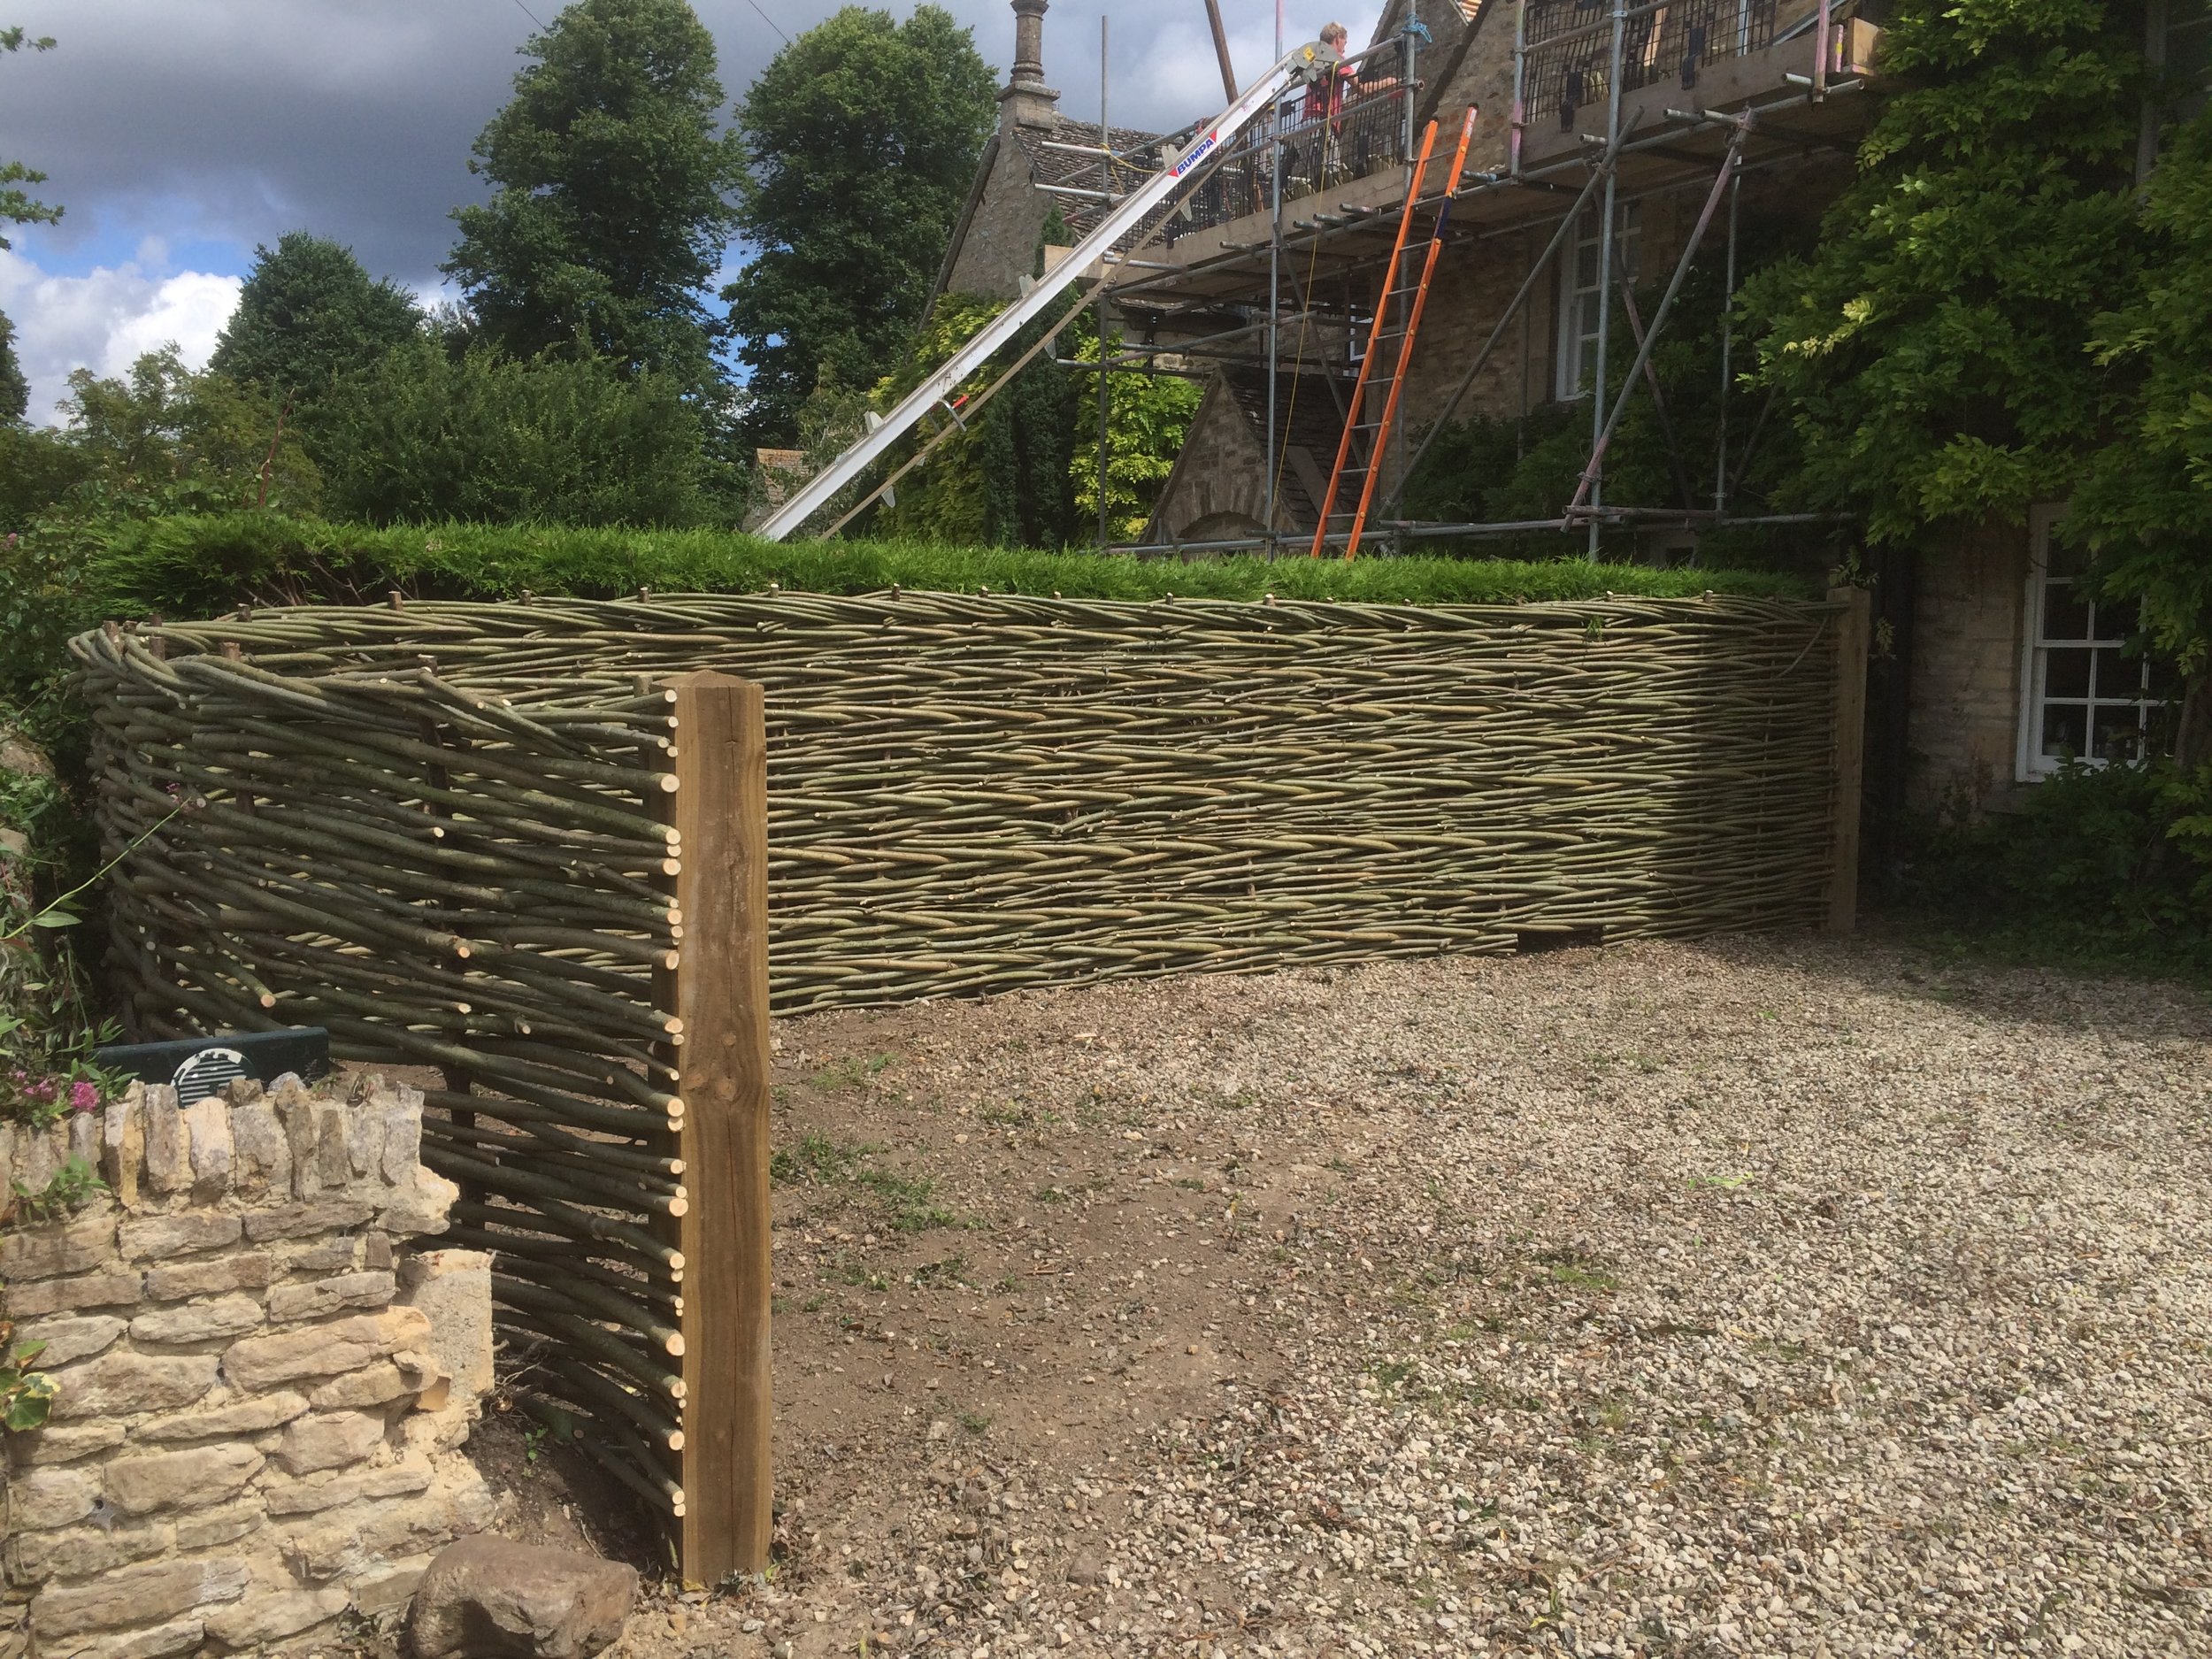 A natural woven willow fence